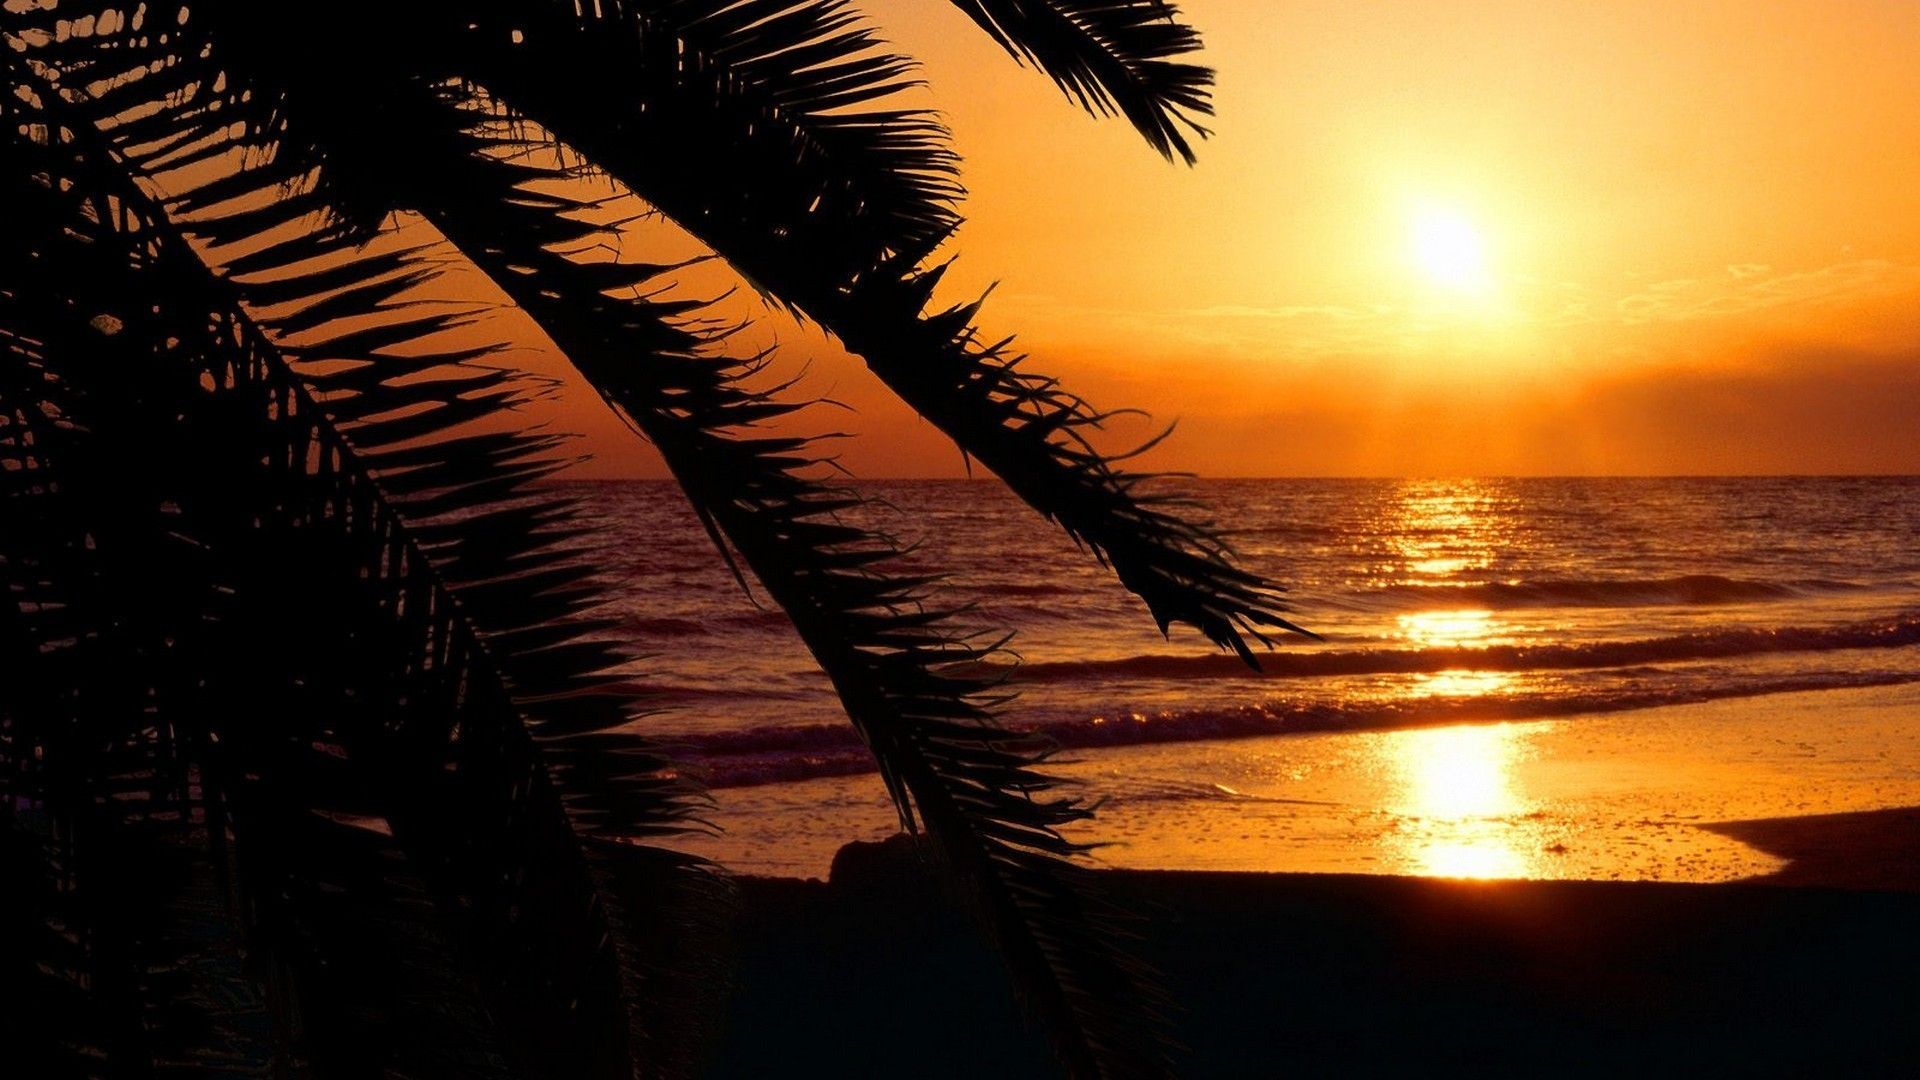 Free download Florida beaches palm trees silhouettes sunset